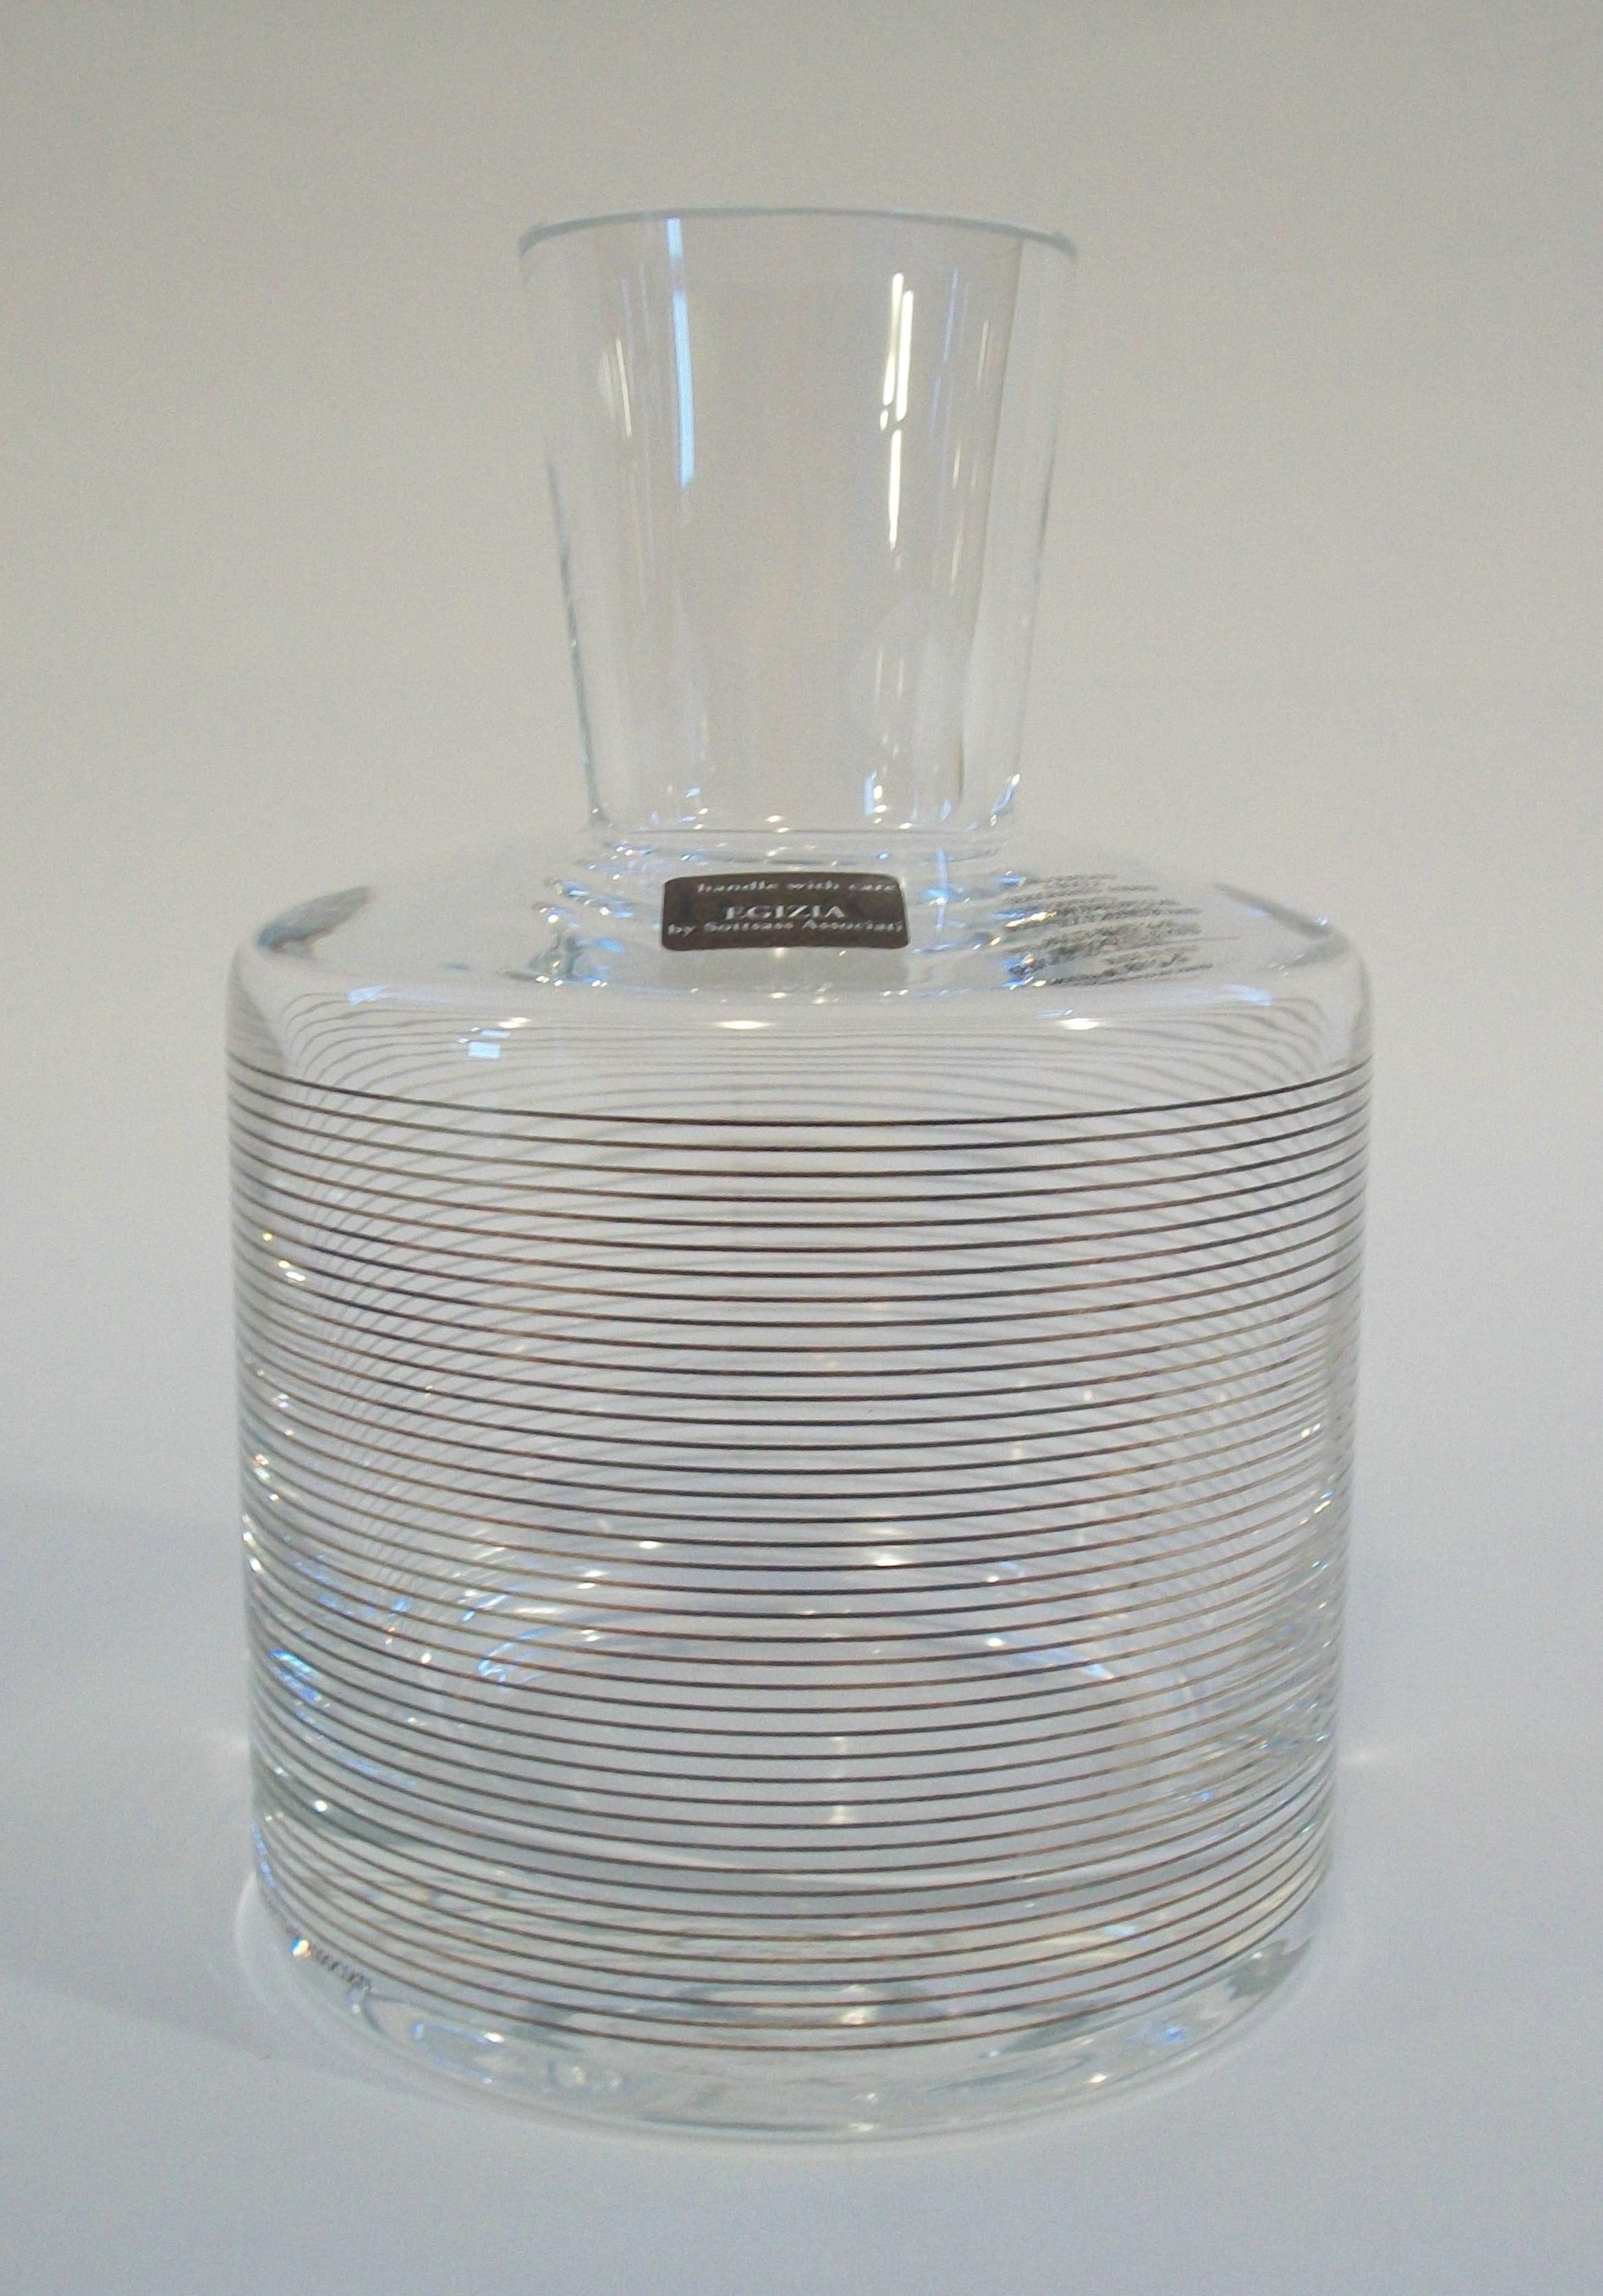 DEFNE KOZ for hwc EGIZIA by SOTTSASS ASSOCIATI - Retailed by Birks - Postmodern studio glass carafe - mouth blown - featuring a metallic horizontal stripe hand printed silkscreen pattern on the clear glass body - clear glass easy grip flared mouth -